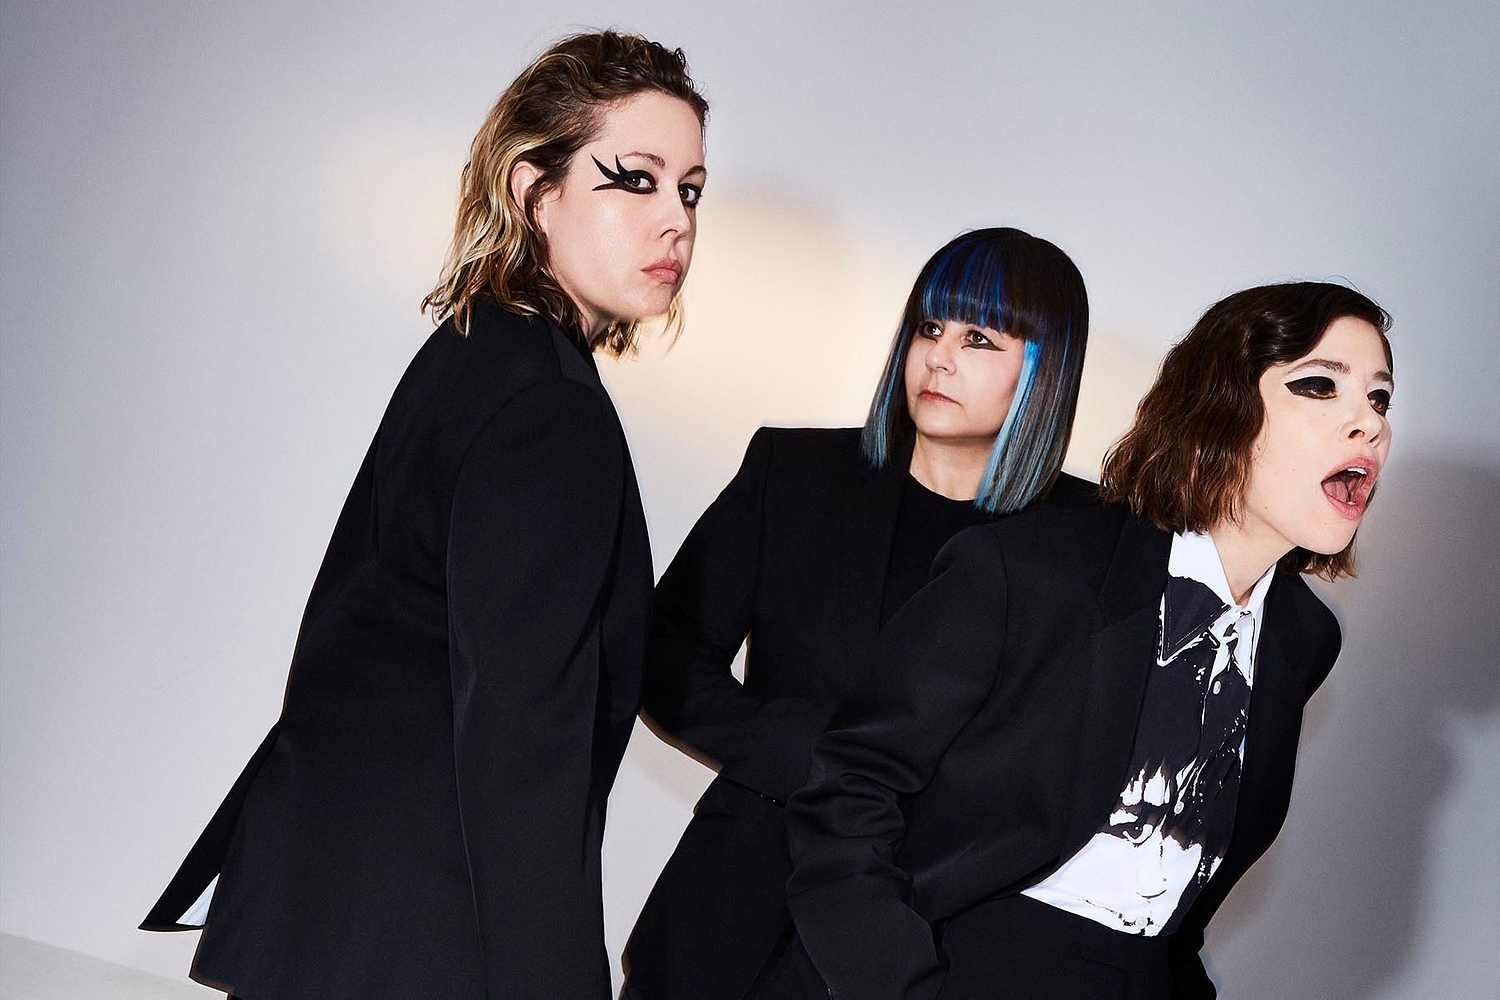 Sleater-Kinney unveil new track ‘The Center Won’t Hold’